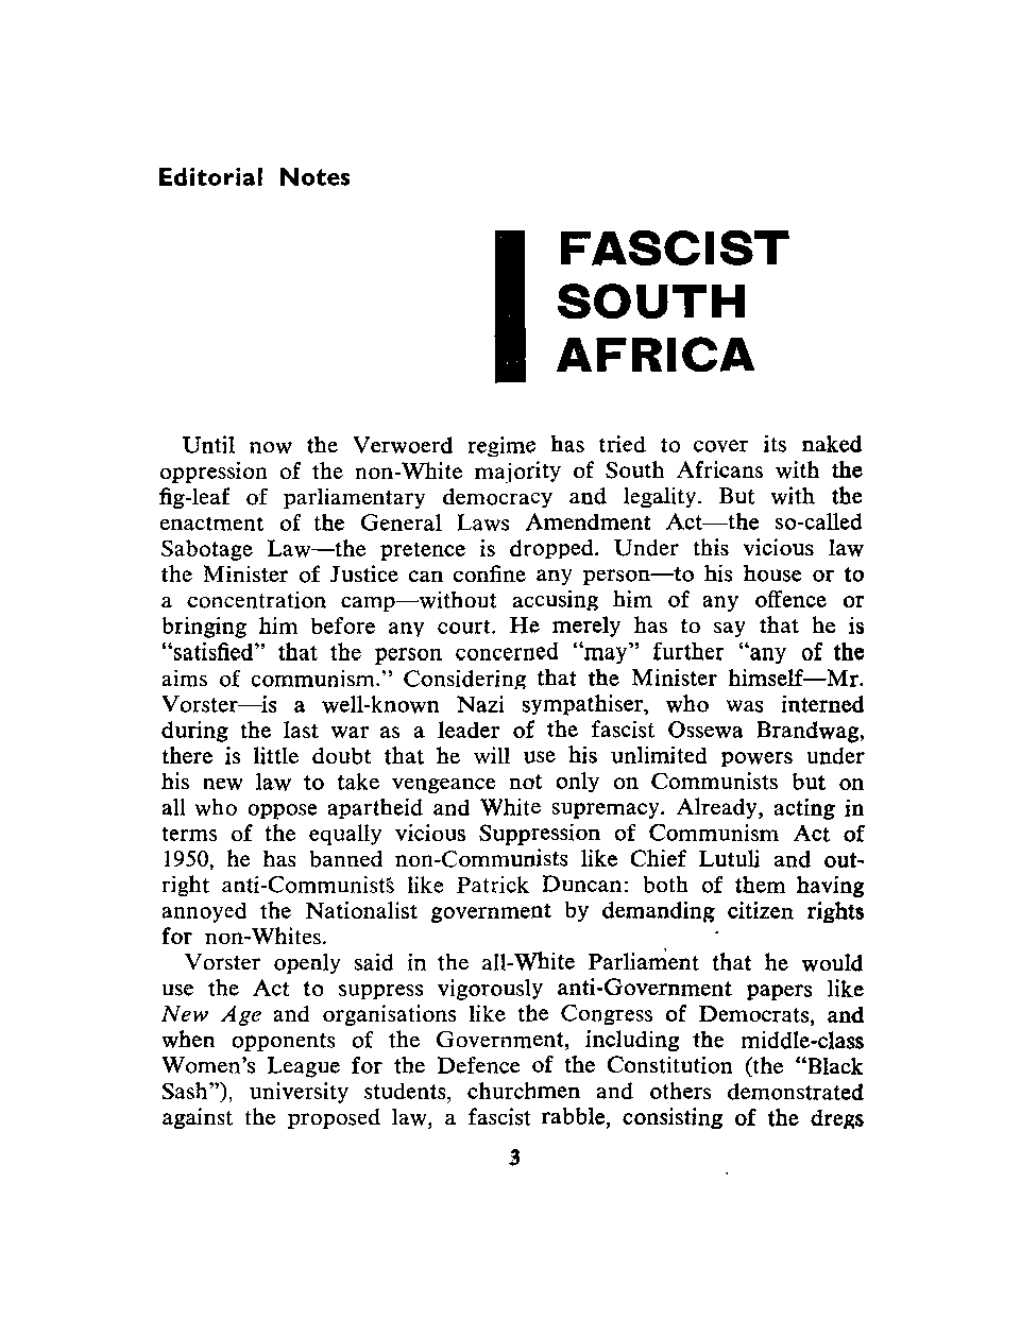 Ifascist South Africa